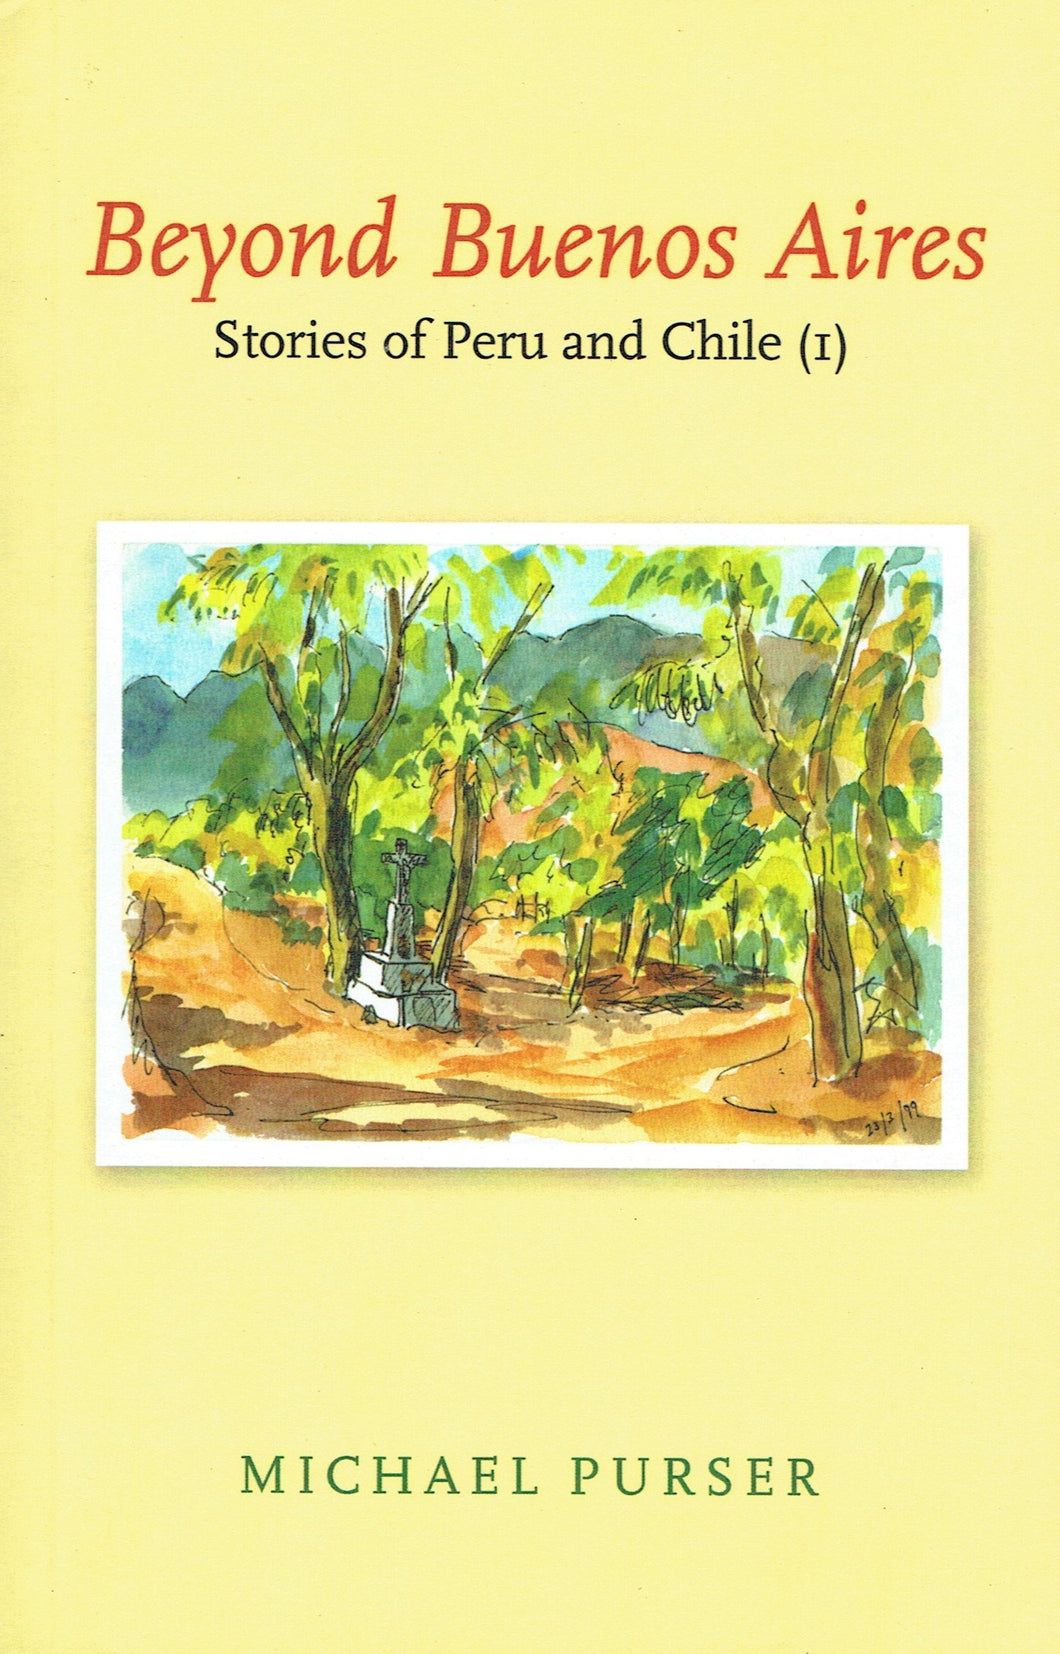 Beyond Buenos Aires: Stories of Peru and Chile (I)